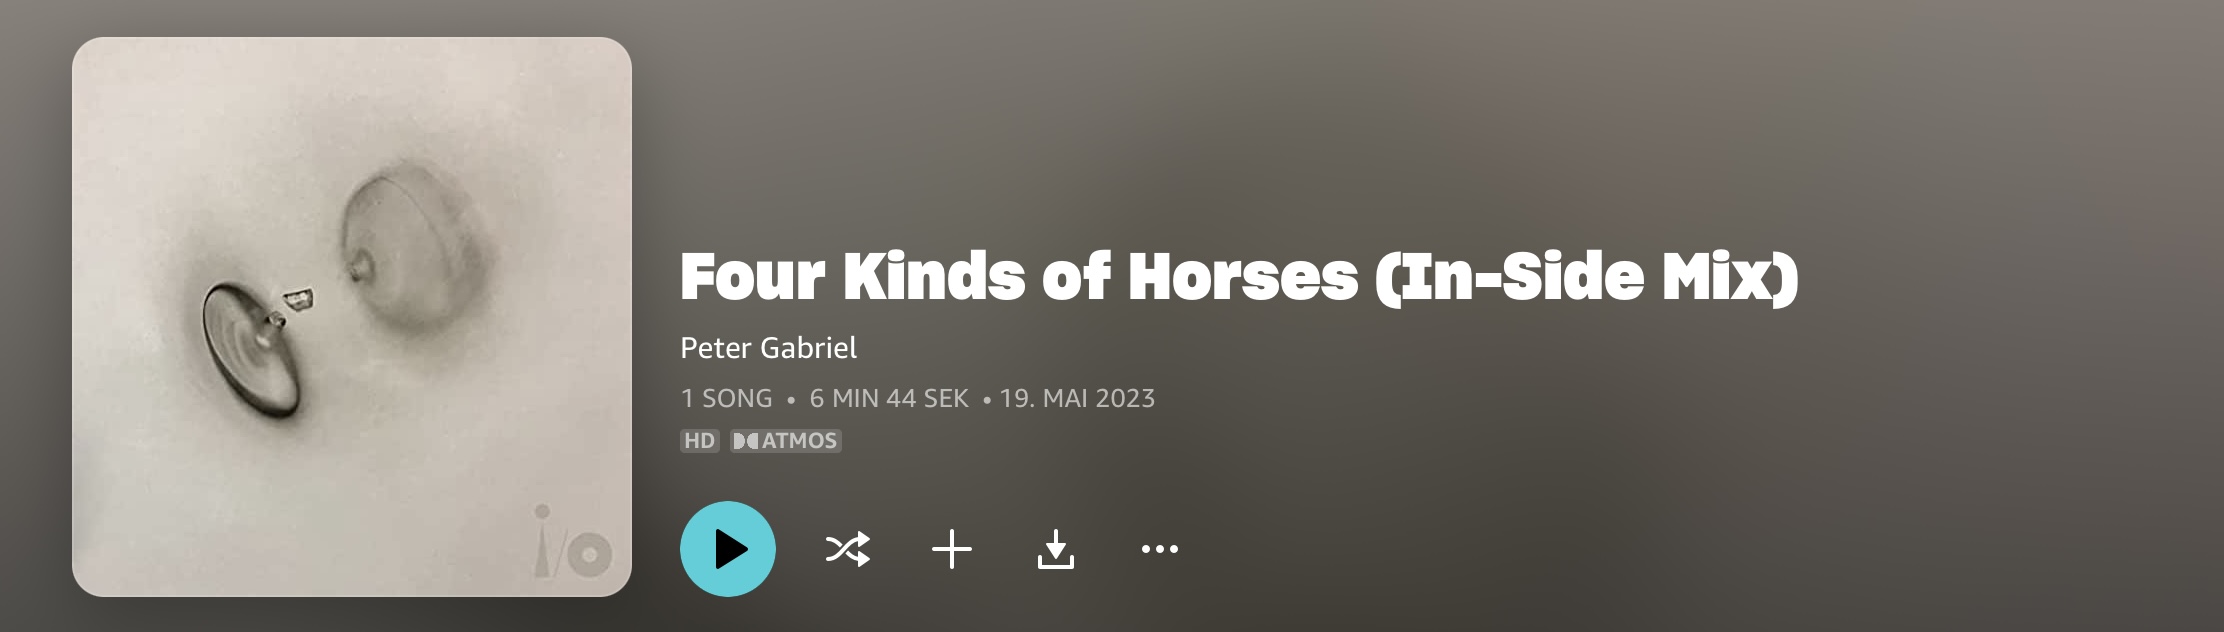 Peter Gabriel Four Kinds Of Horses In-Side-Mix Dolby Atmos